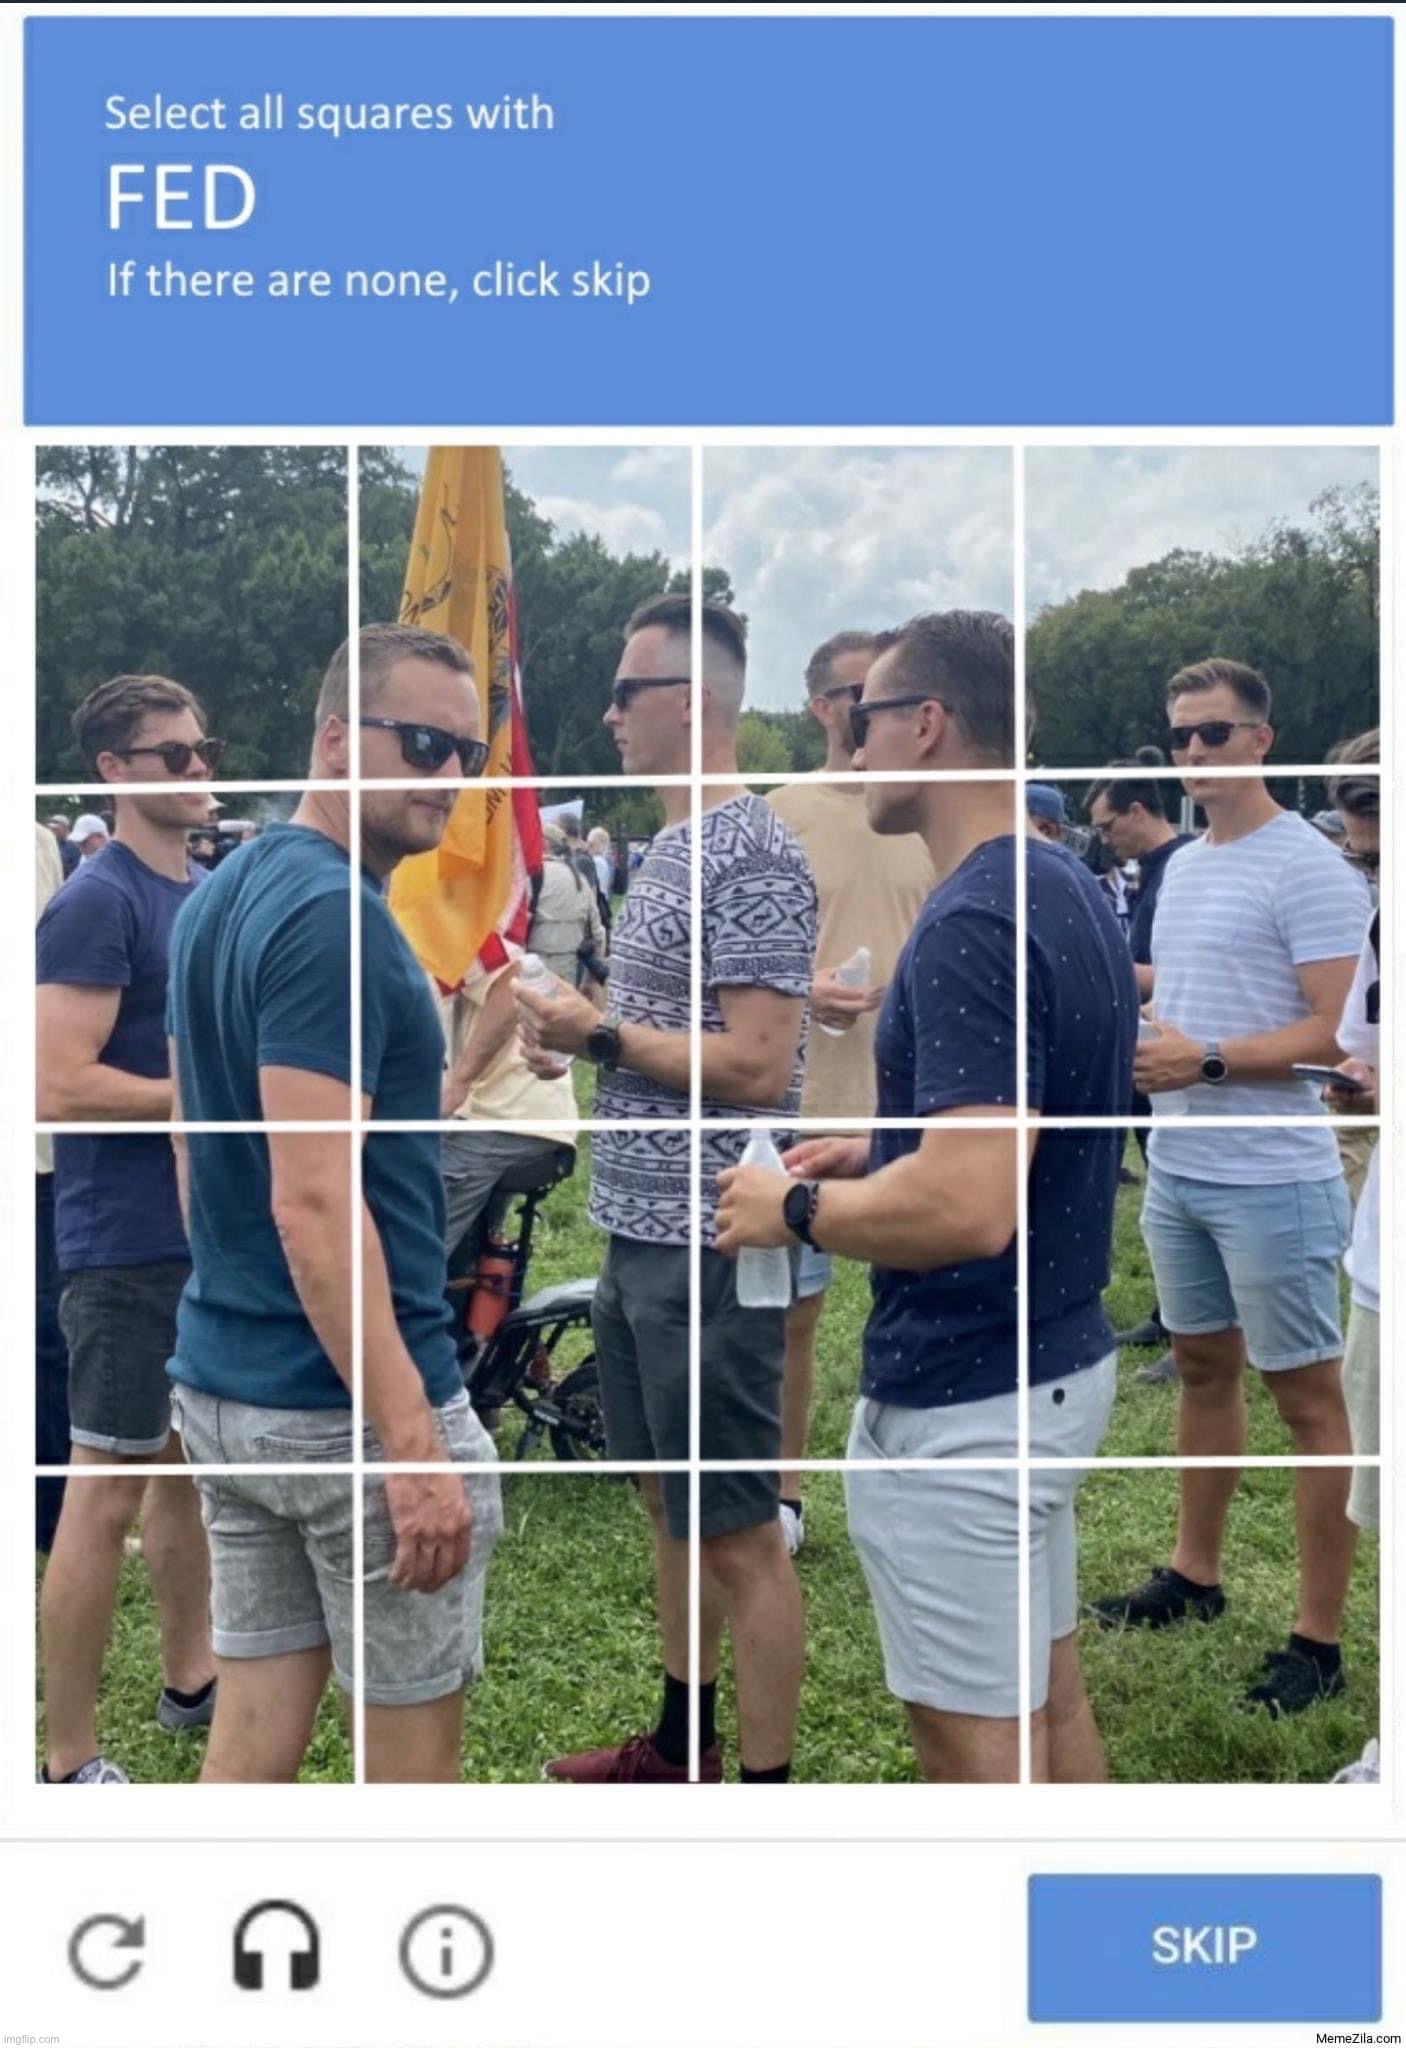 I’m at this cool BBQ rn, no FBI here just bros enjoying their day. I’ll let you know if I need anything | image tagged in select all squares with fed,f,b,i,fbi,bros | made w/ Imgflip meme maker